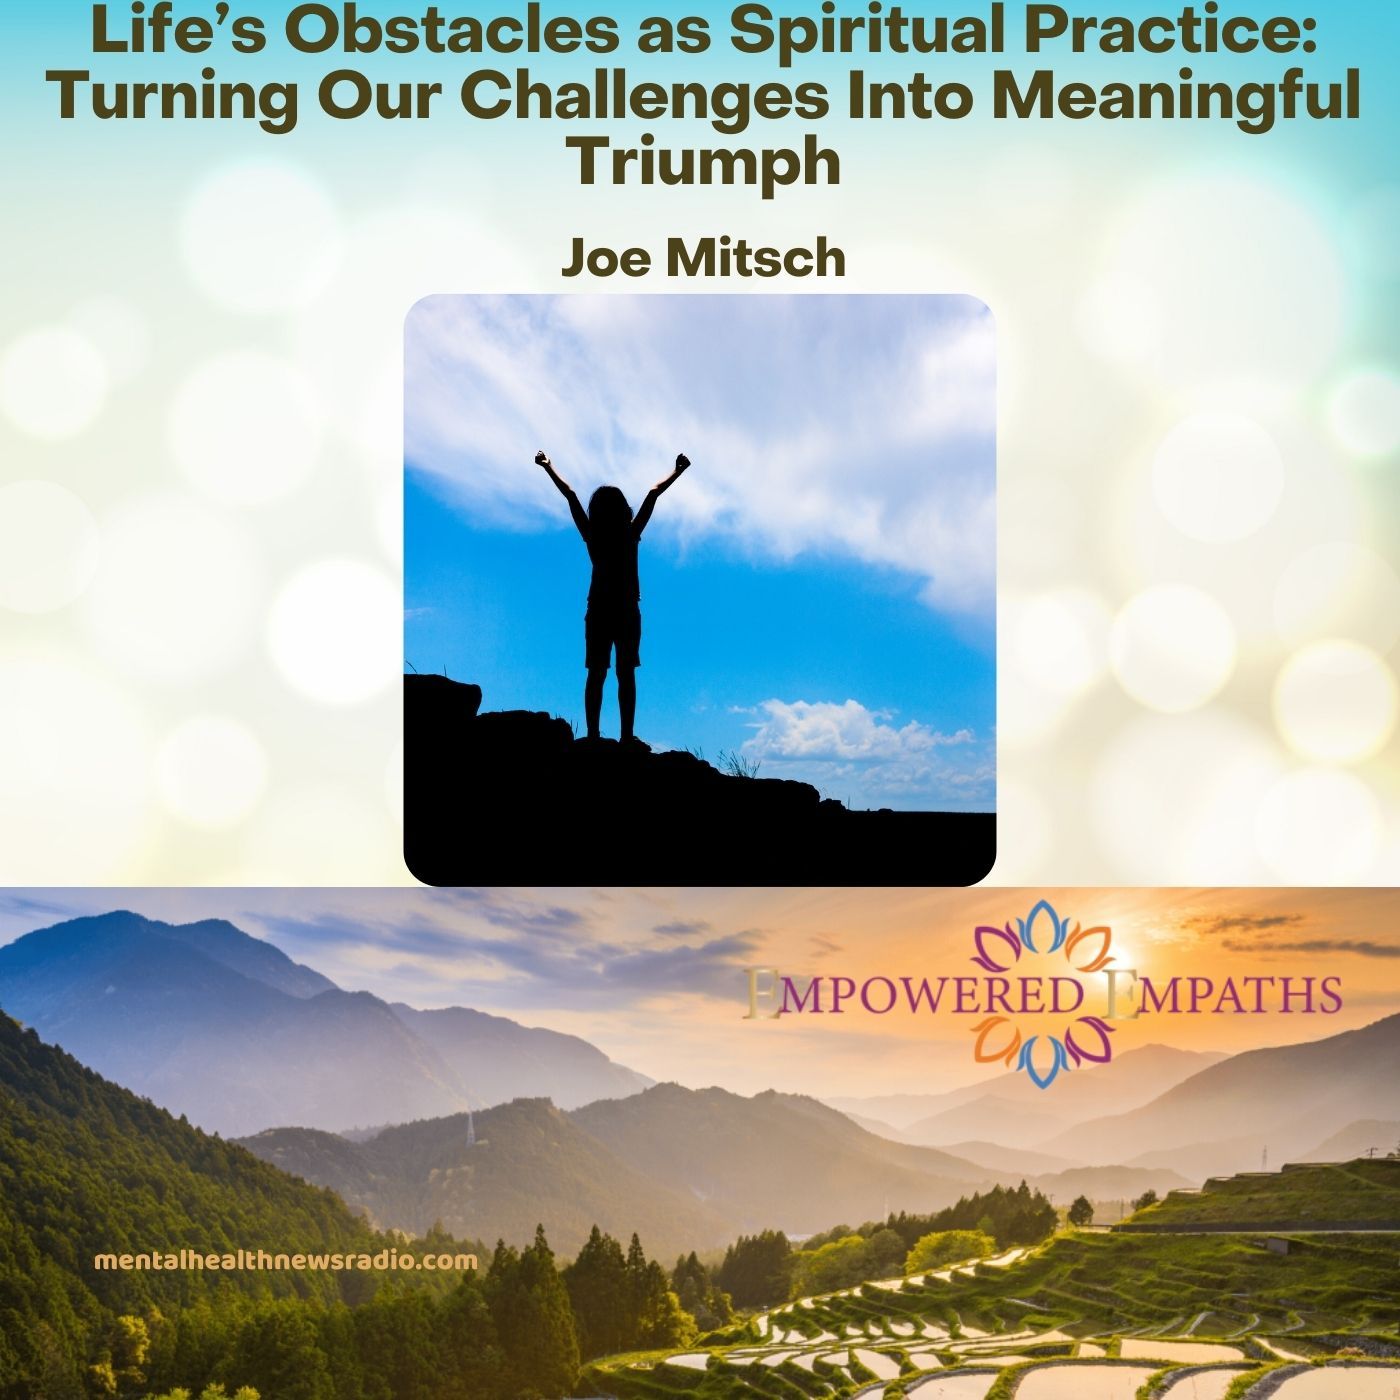 Life’s Obstacles as Spiritual Practice: Turning Our Challenges Into Meaningful Triumph